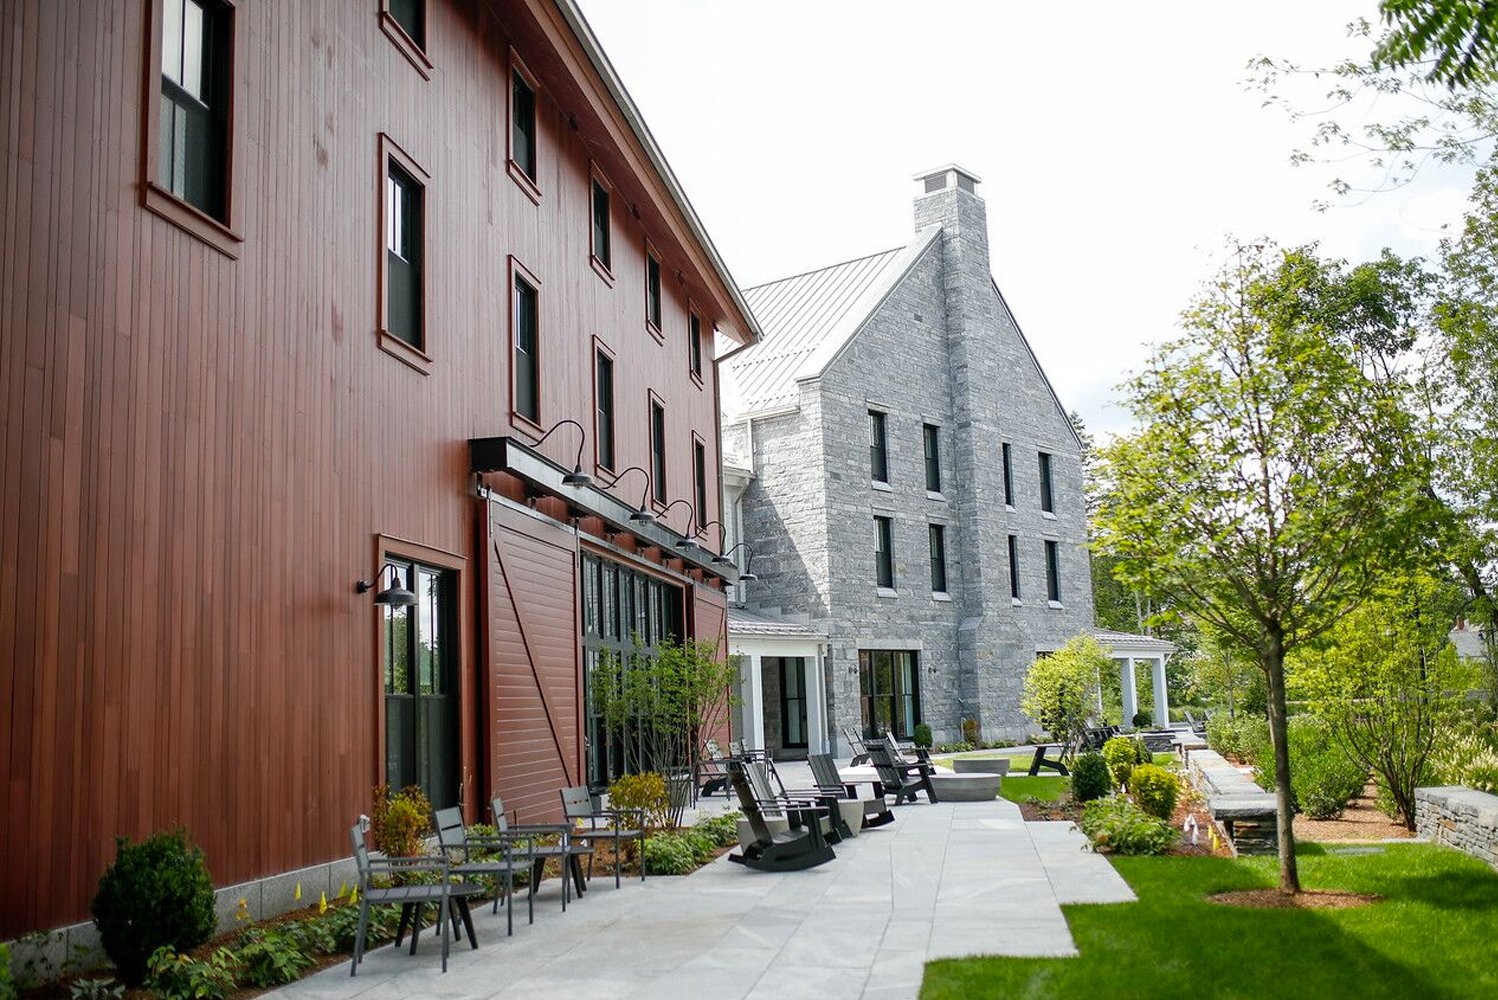 The Williams Inn opened as a new three-story 58000-square-foot 64-room property in Williamstown Massachusetts in the Nor